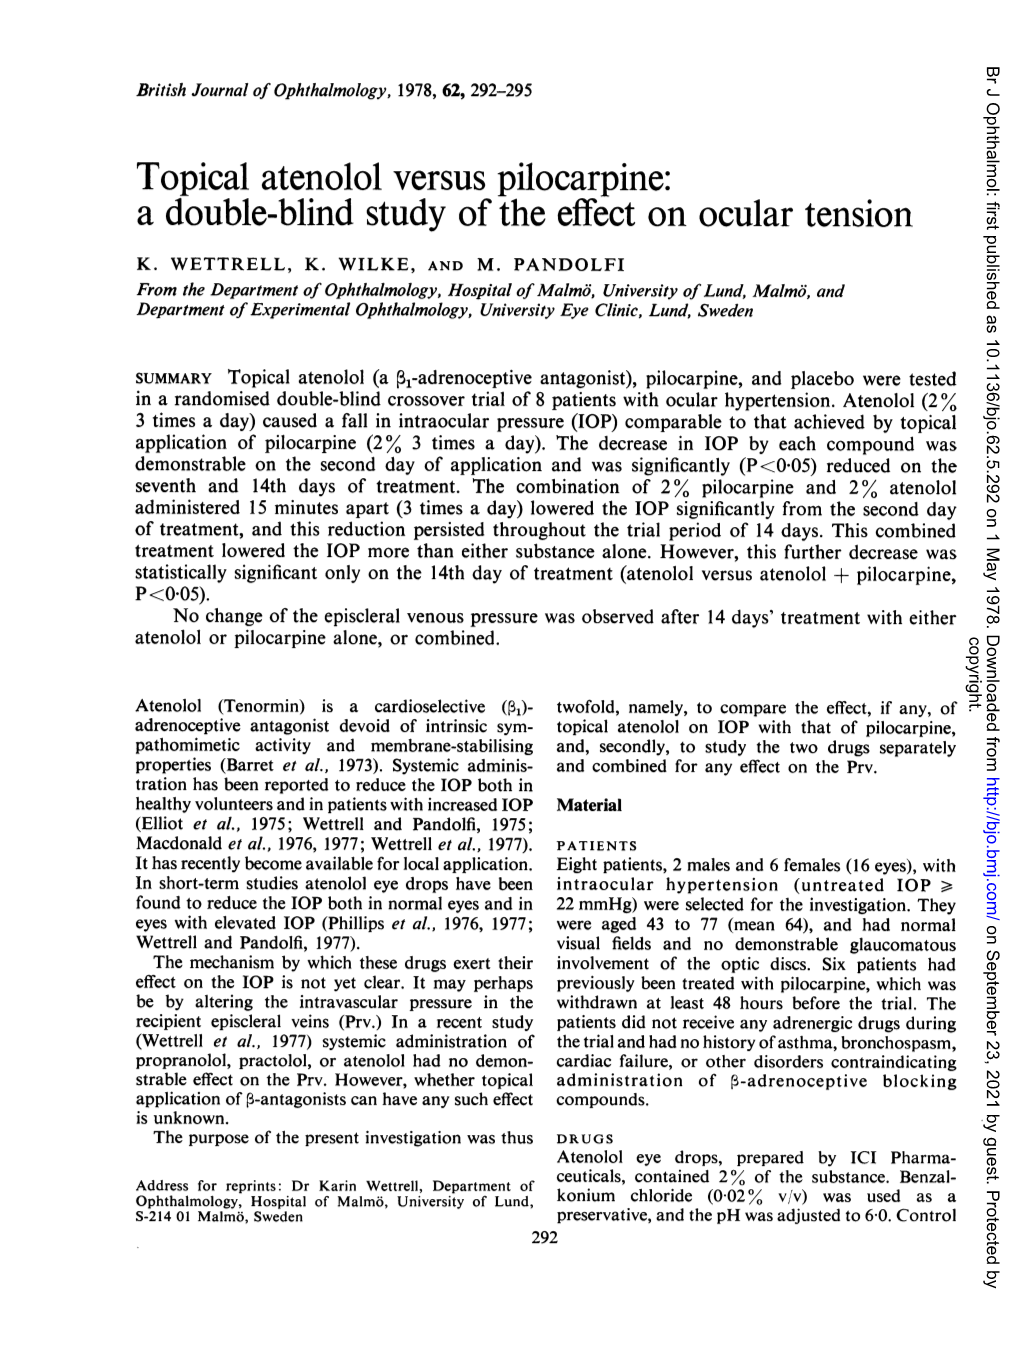 Topical Atenolol Versus Pilocarpine: a Double-Blind Study of the Effect on Ocular Tension